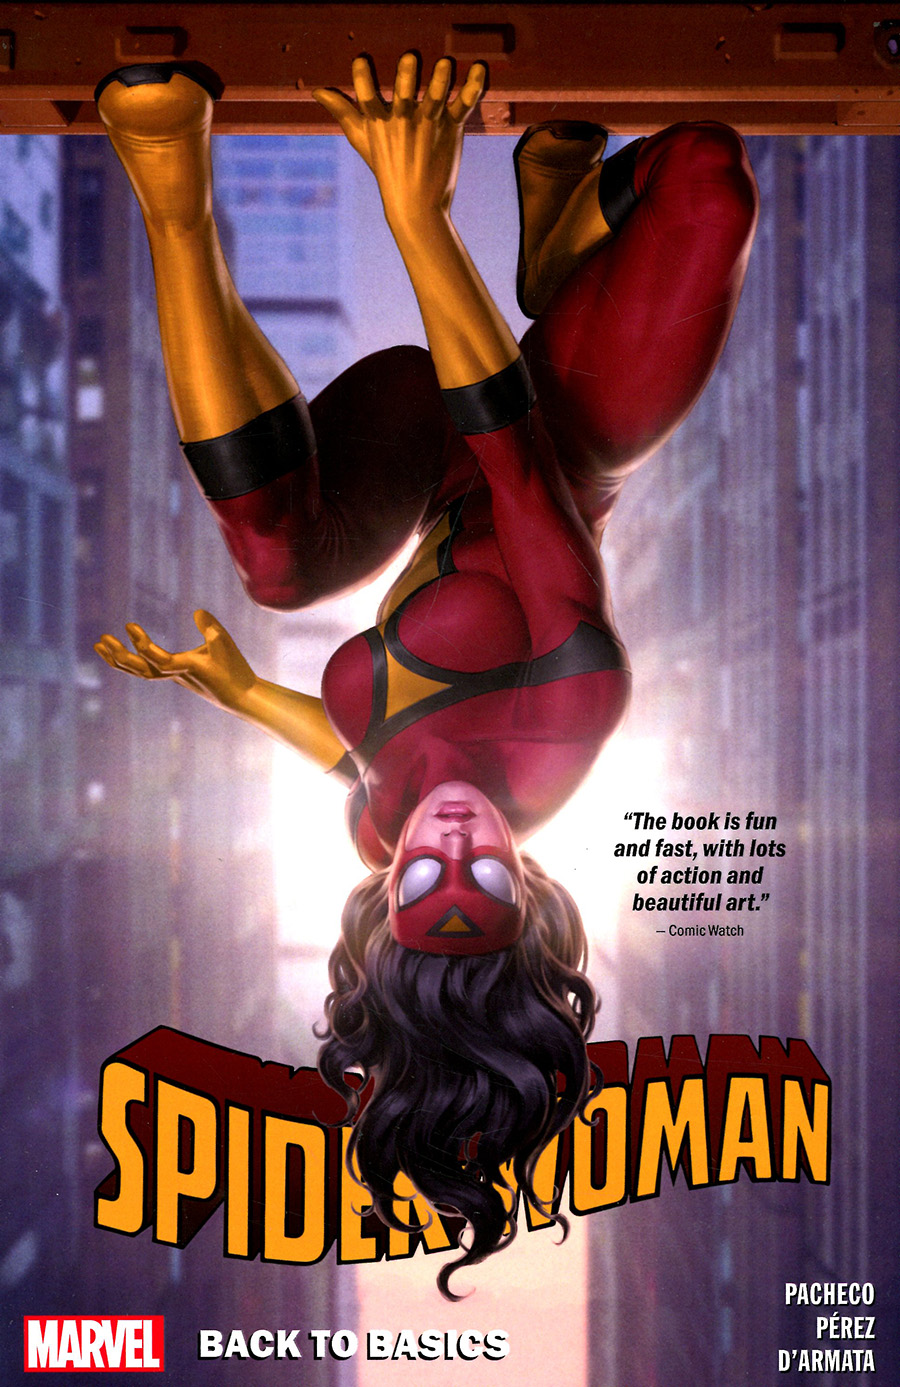 Spider-Woman (2020) Vol 3 Back To Basics TP